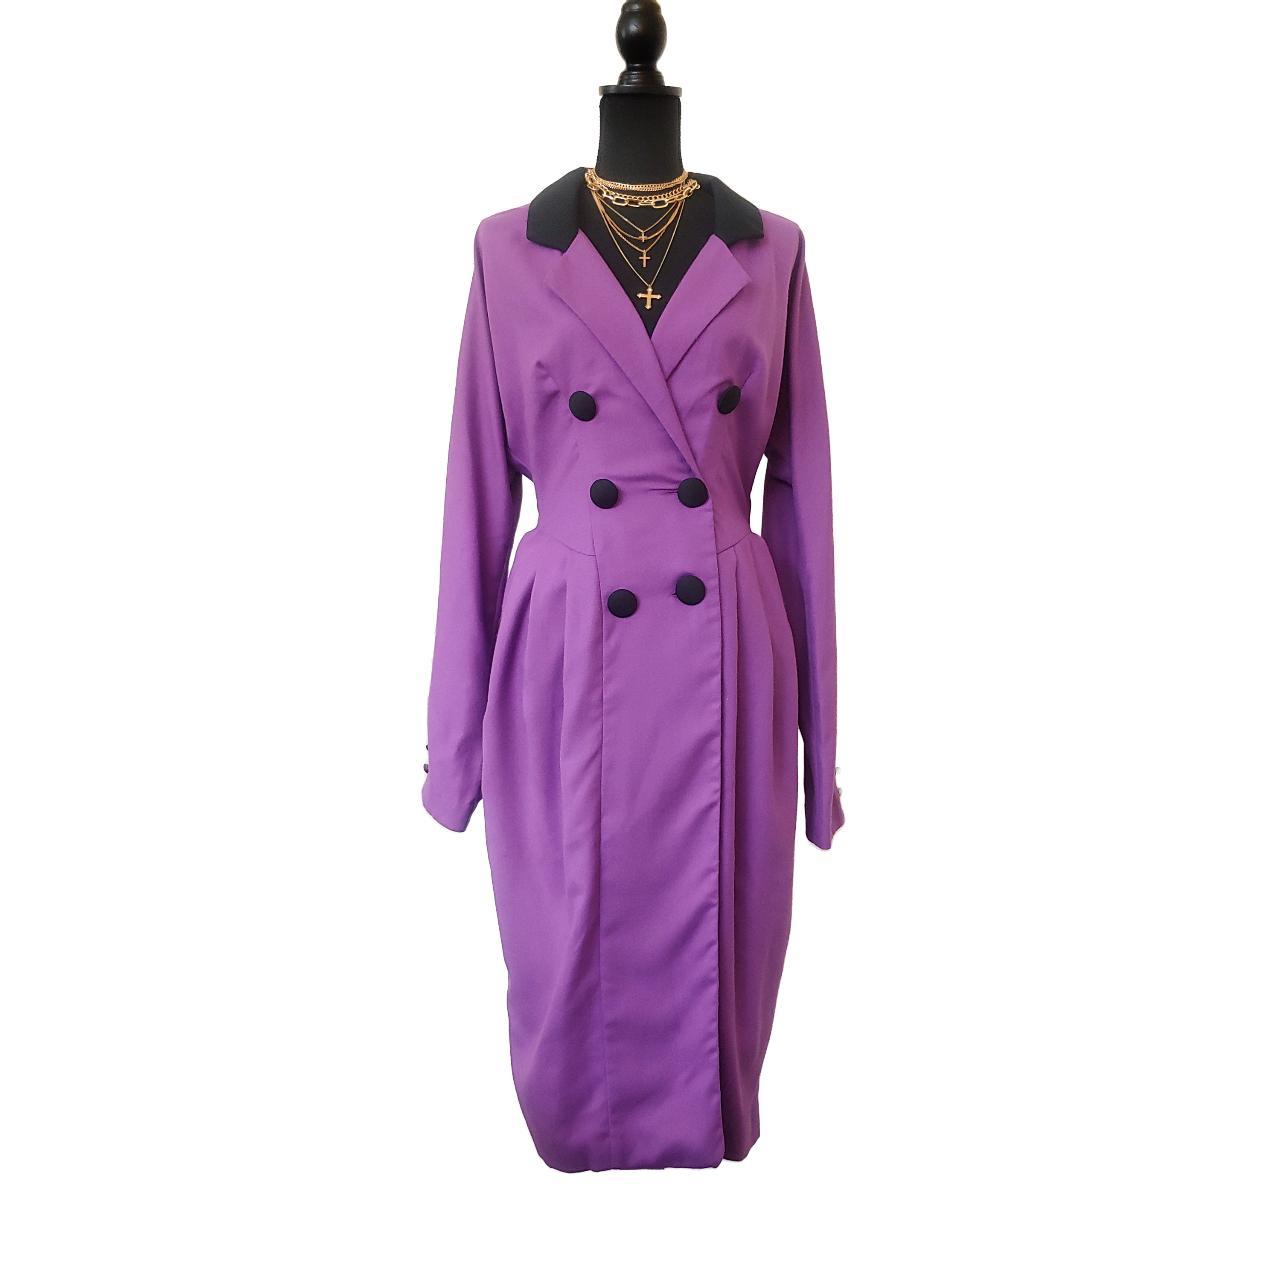 Vintage 1980s New Wave Goth Purple Trench Coat This... - Depop